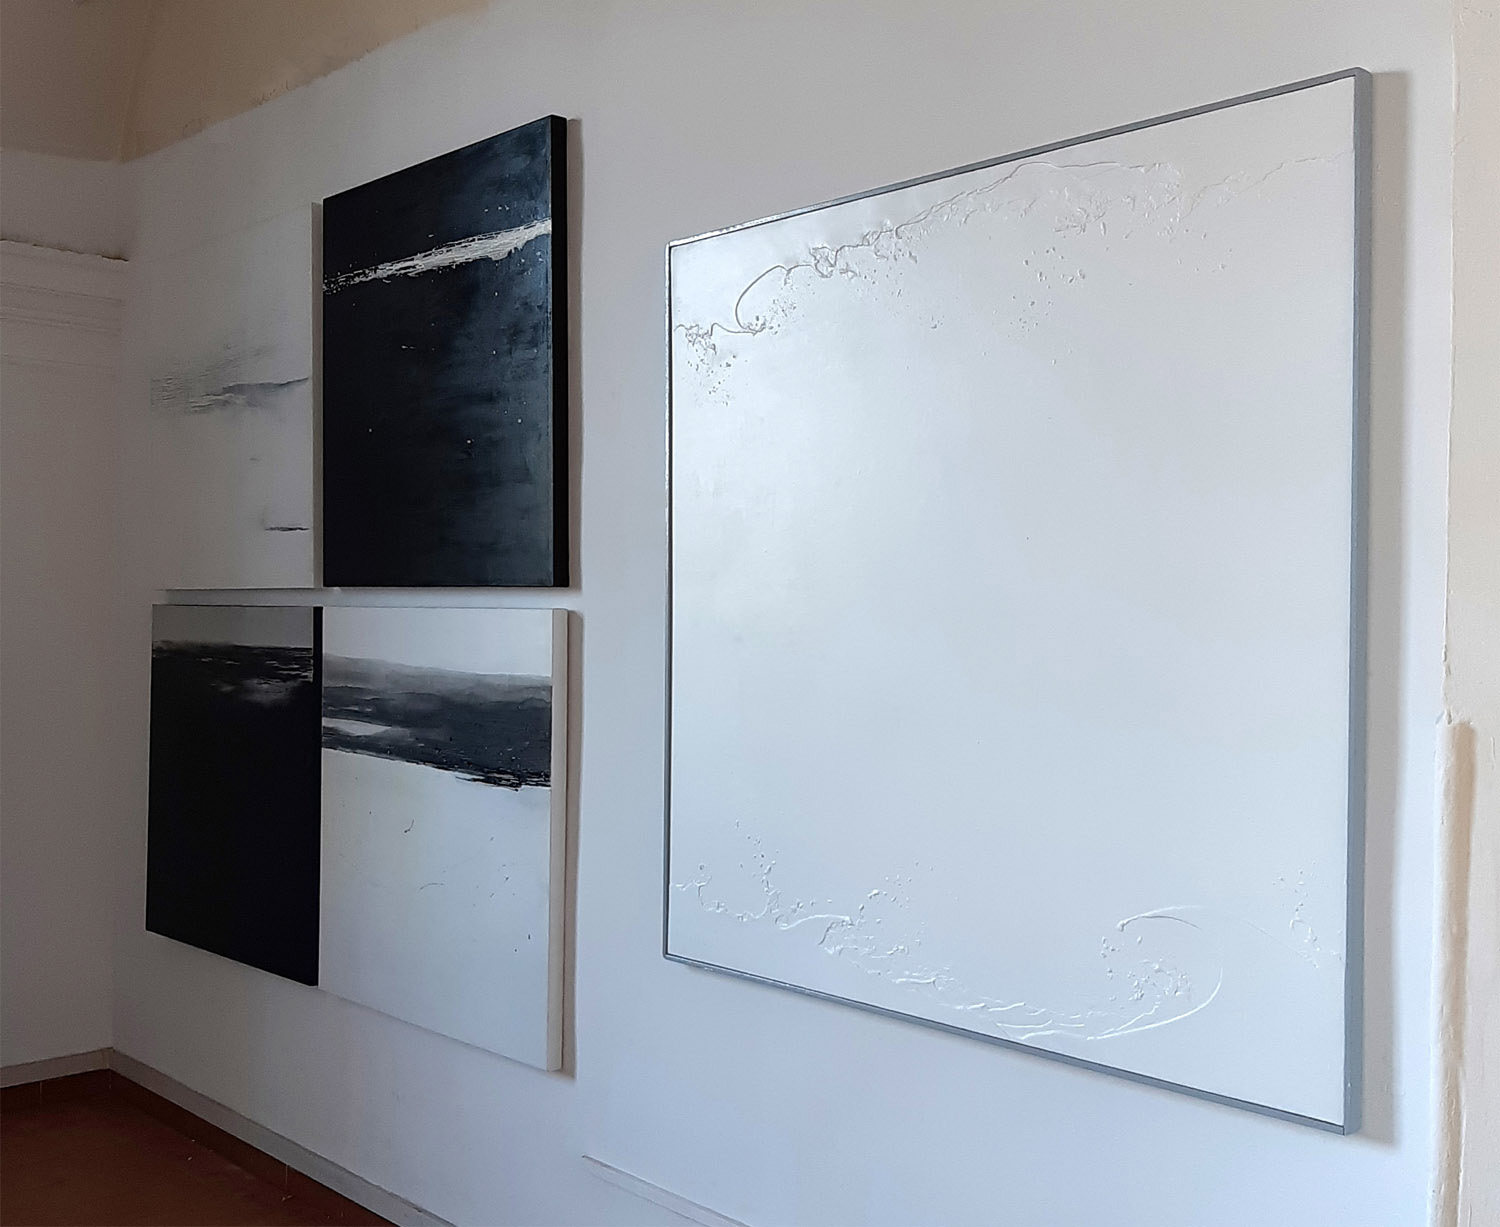 The exhibits of Sergio Aiello contemporary visual artist of Abstract Contemporary Landscape Paintings at https://www.sergioaiello.com